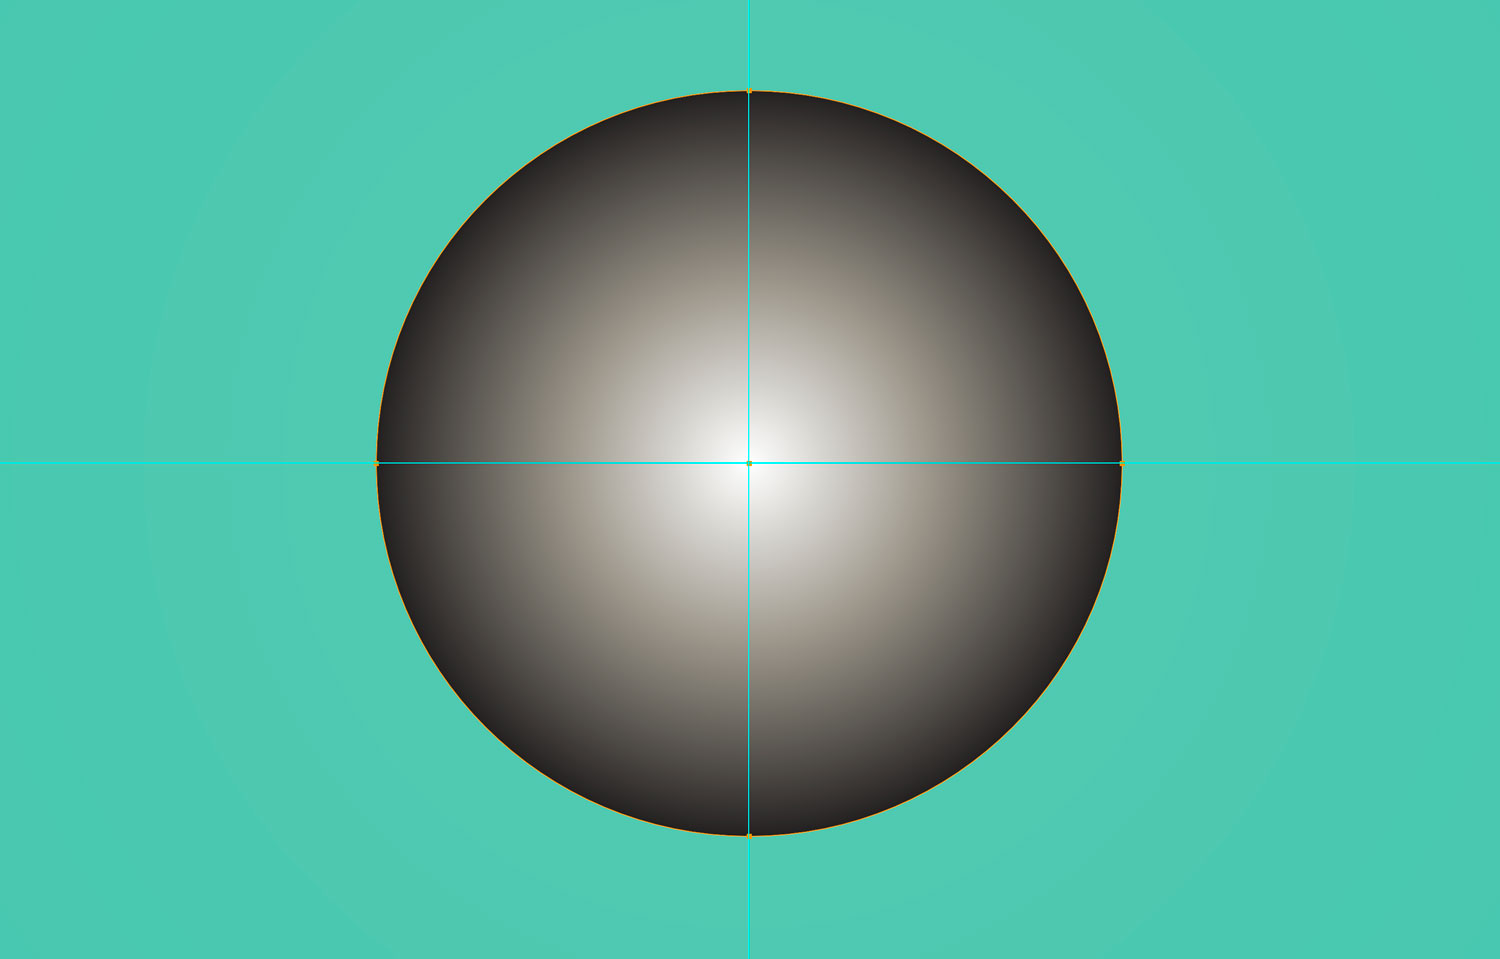 A circle with a white to black radial gradient on a green background